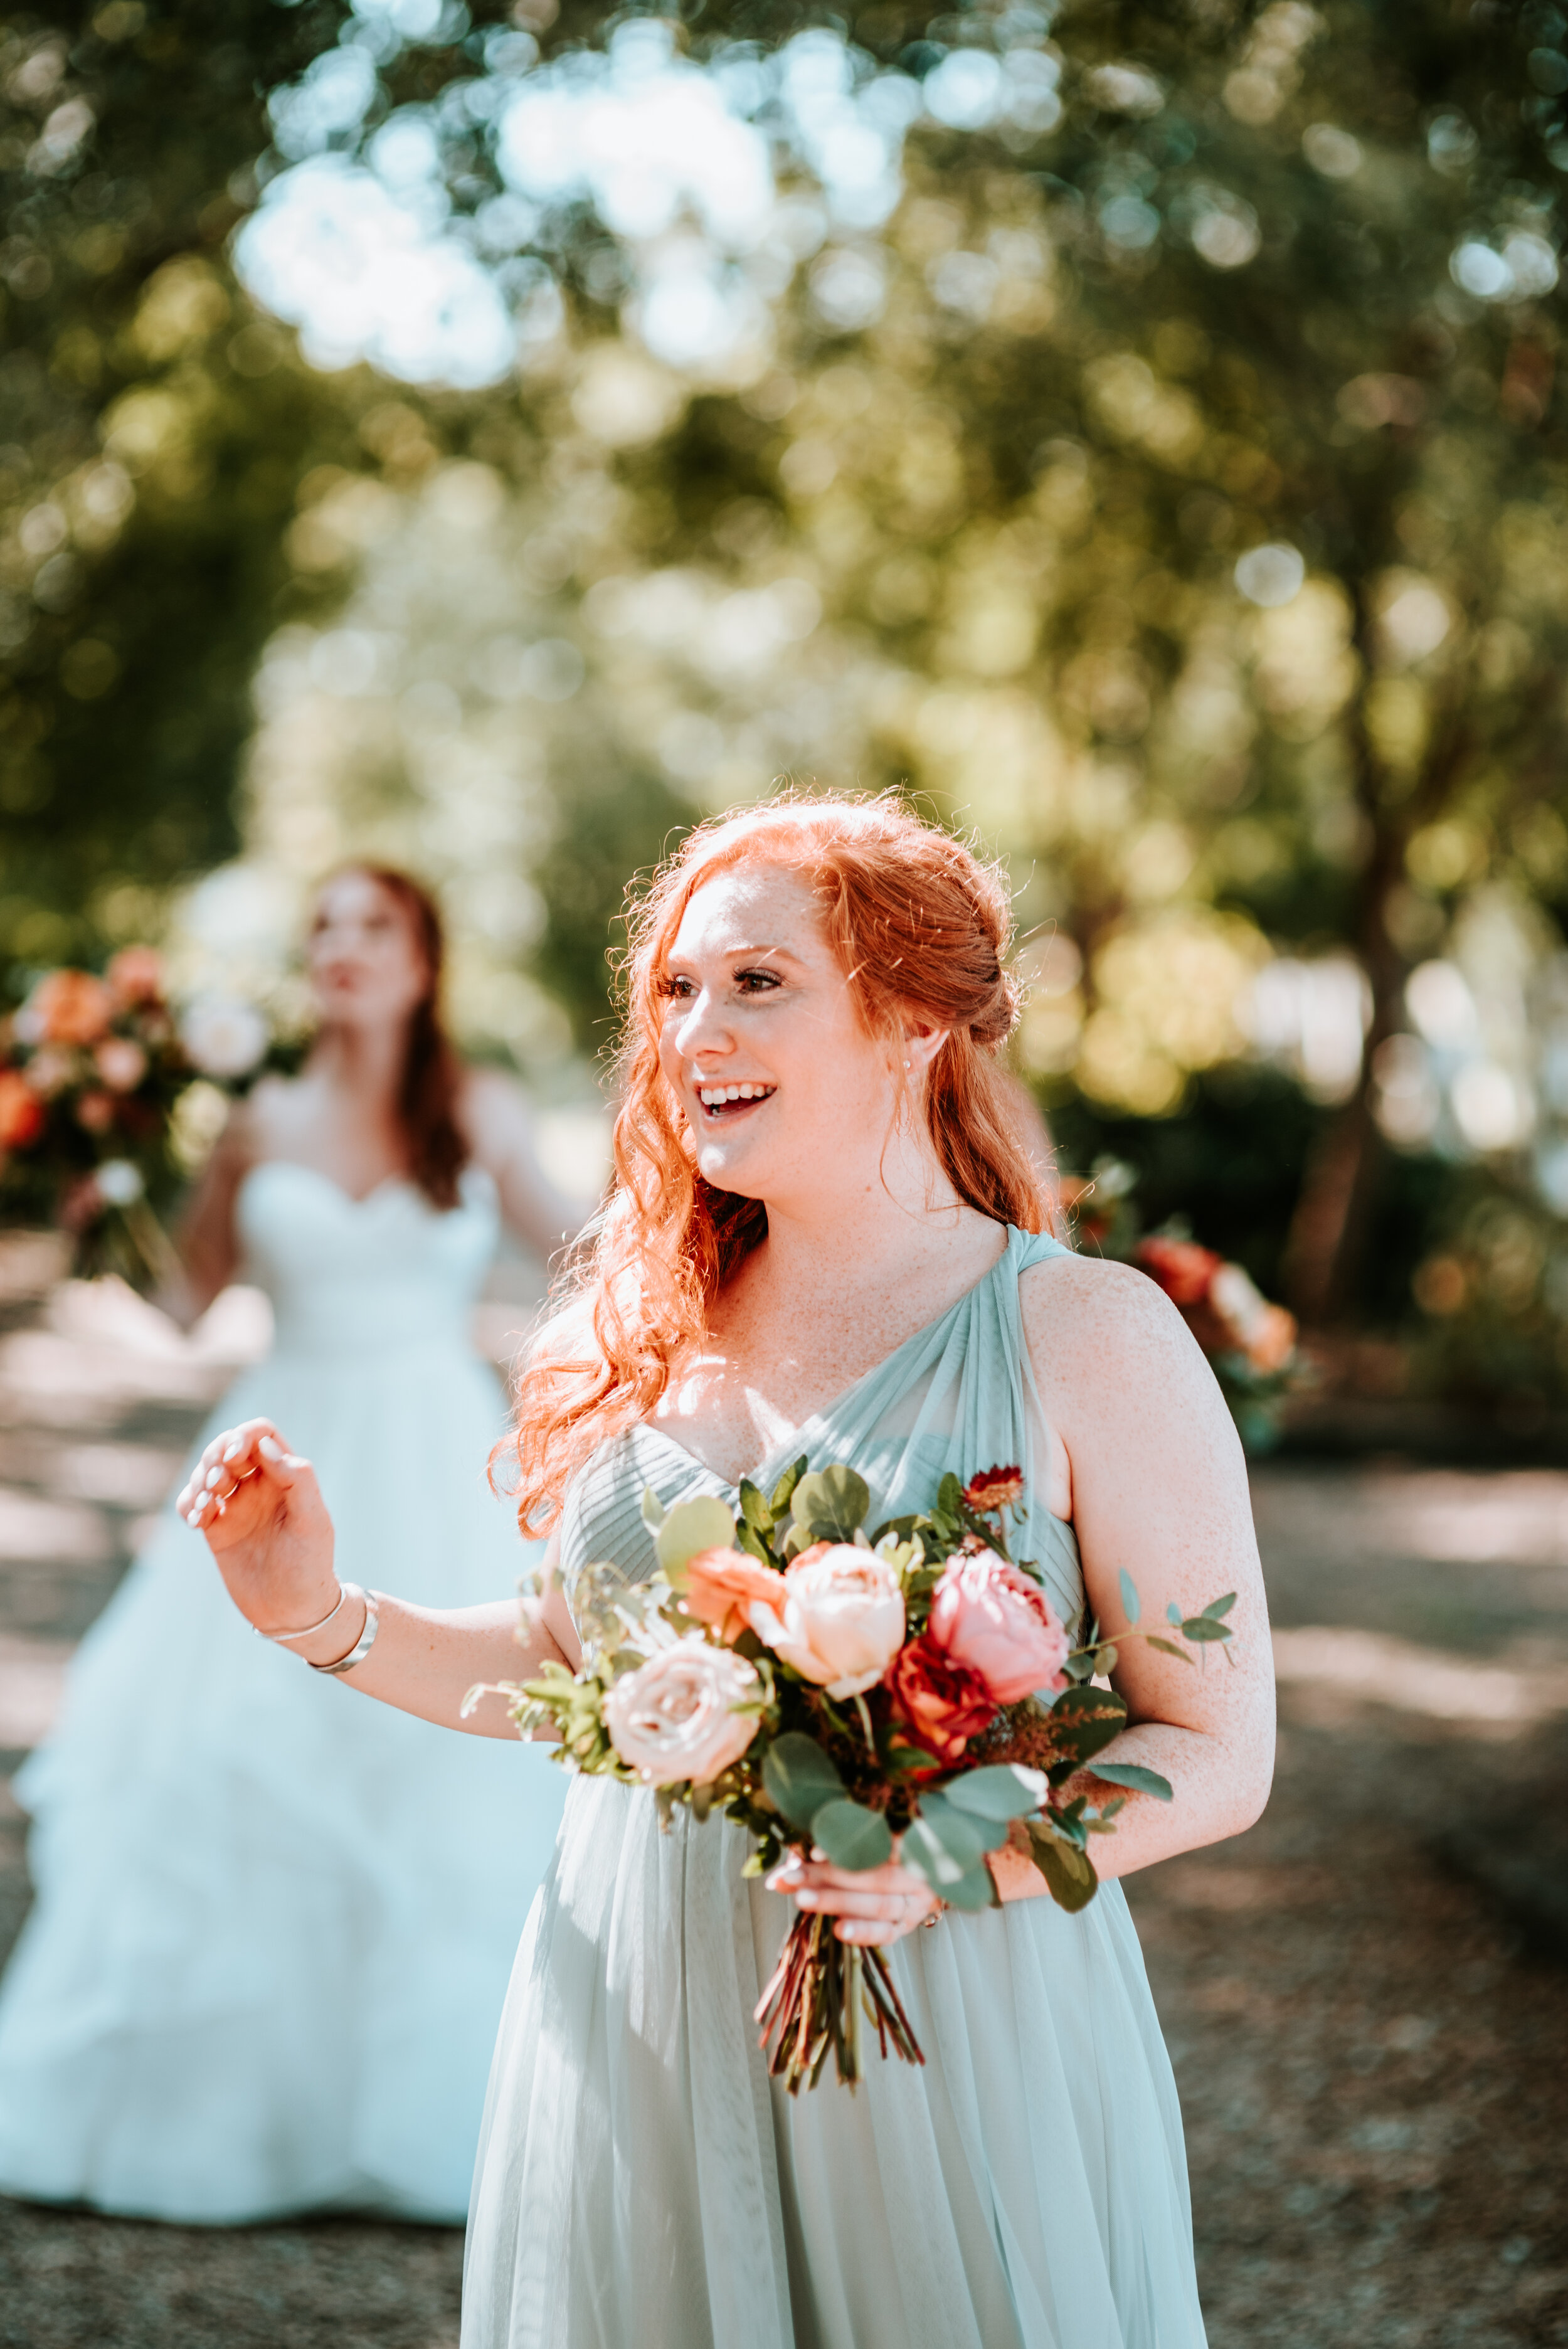 October wedding at Long Hollow Gardens with lush, asymmetrical flower arrangements in a rusty orange and soft peach color palette. Nashville wedding floral design.